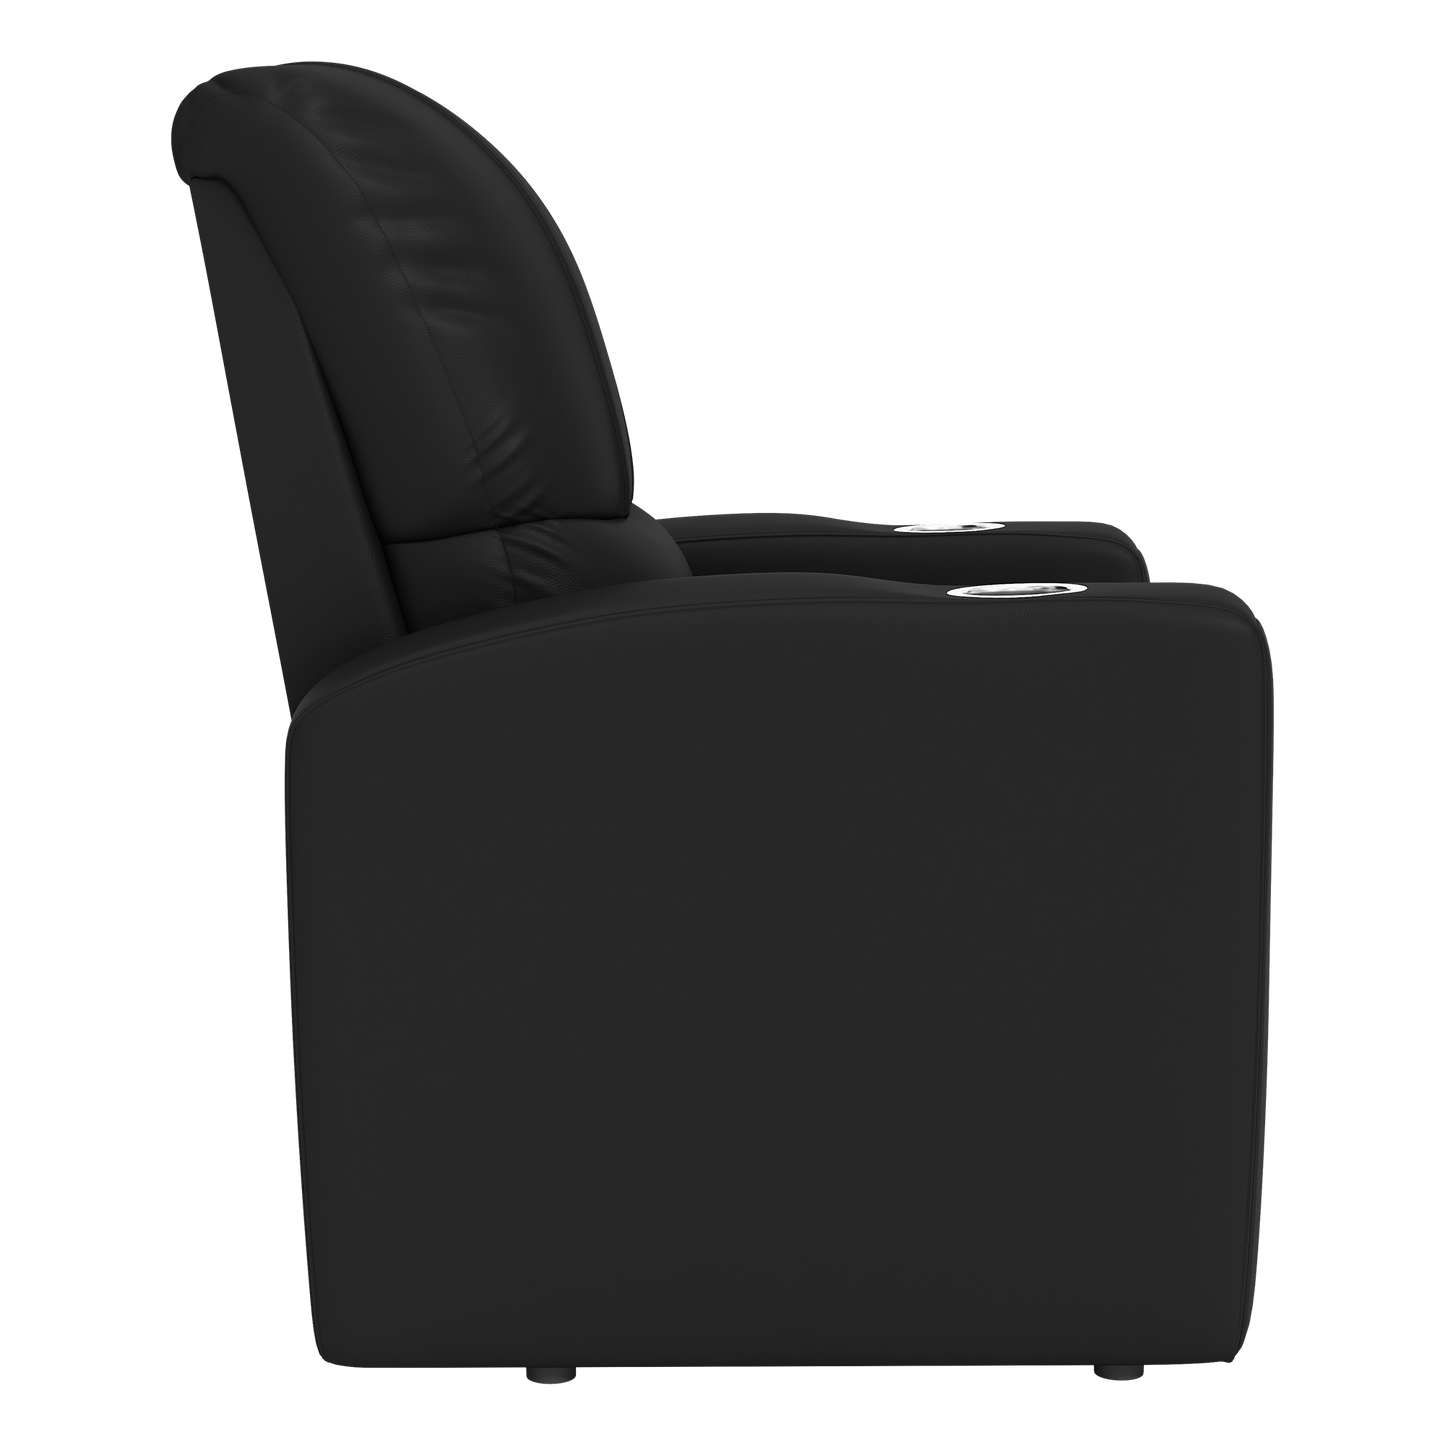 Stealth Recliner with  New York Jets Helmet Logo